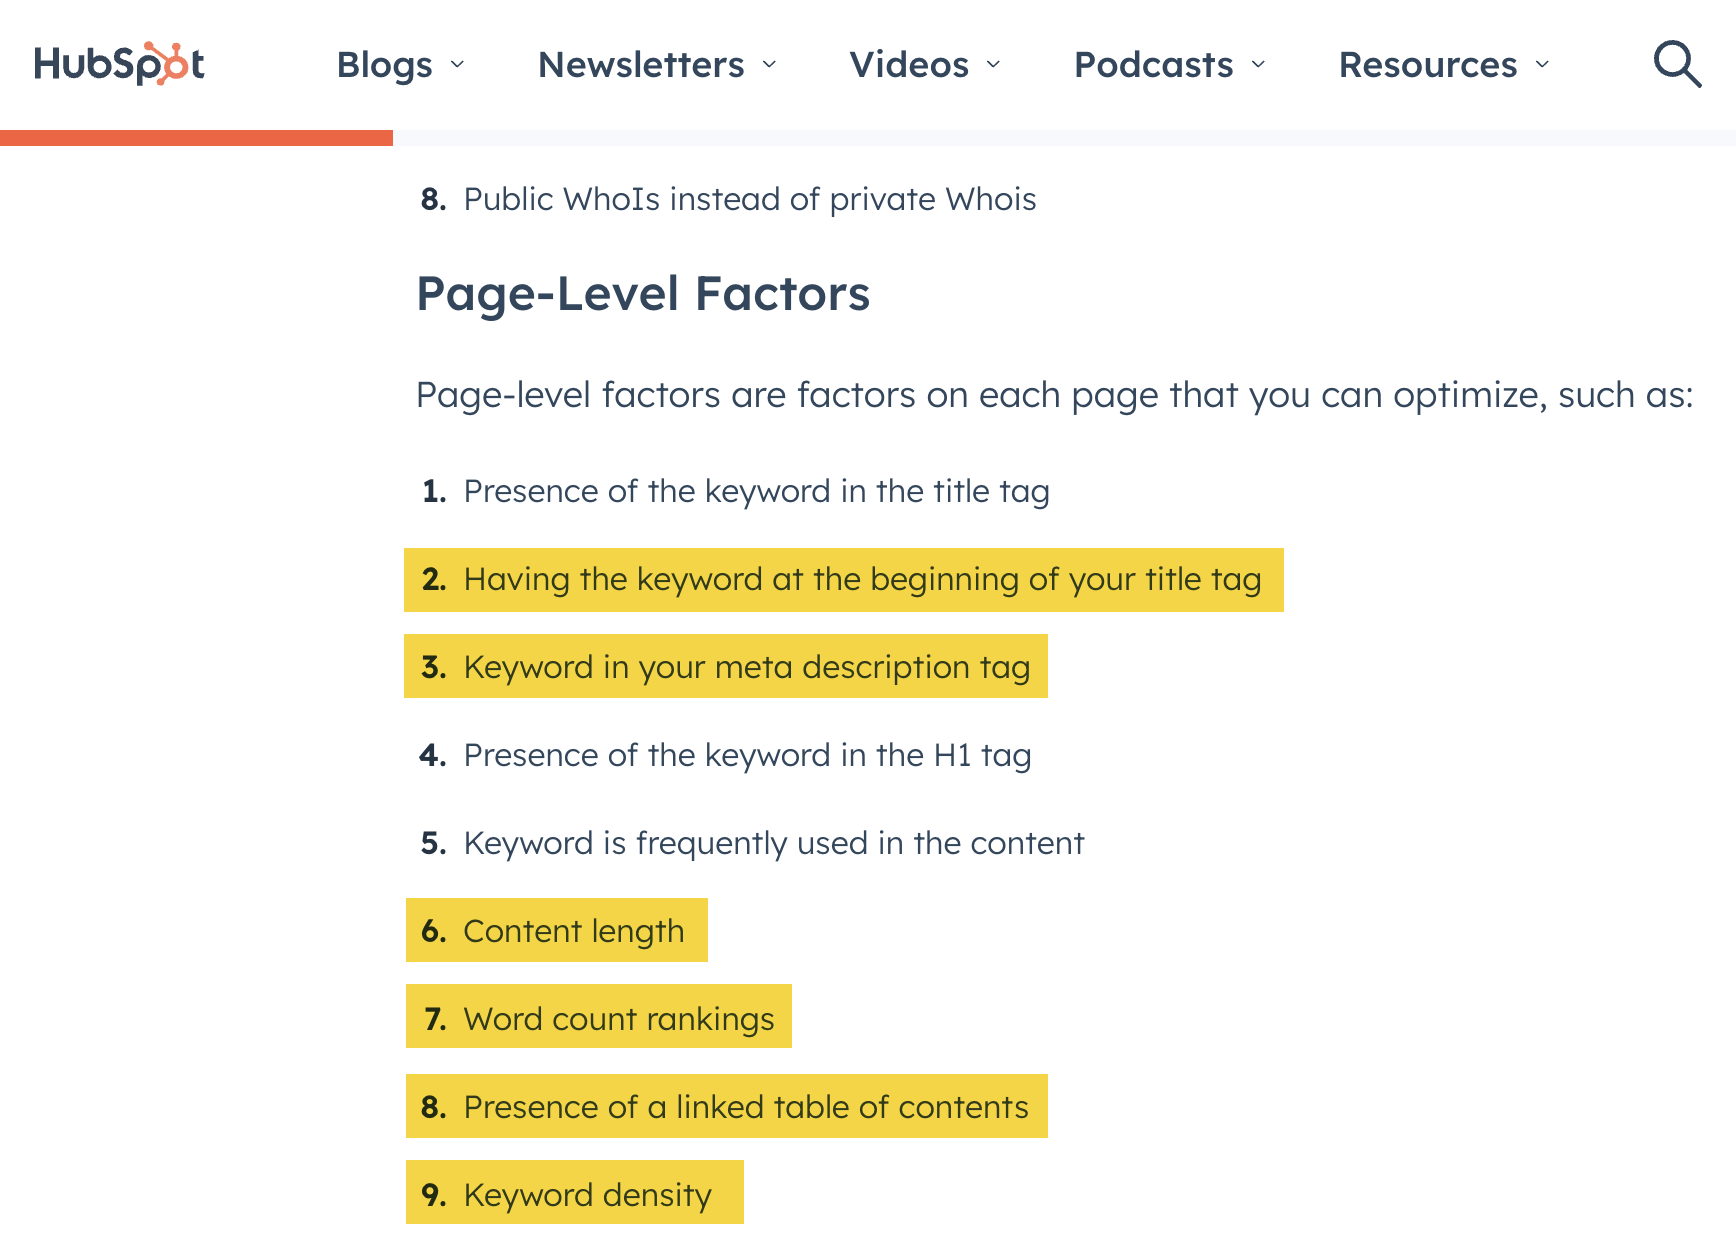 Many of the factors listed on the competing page are misleading
